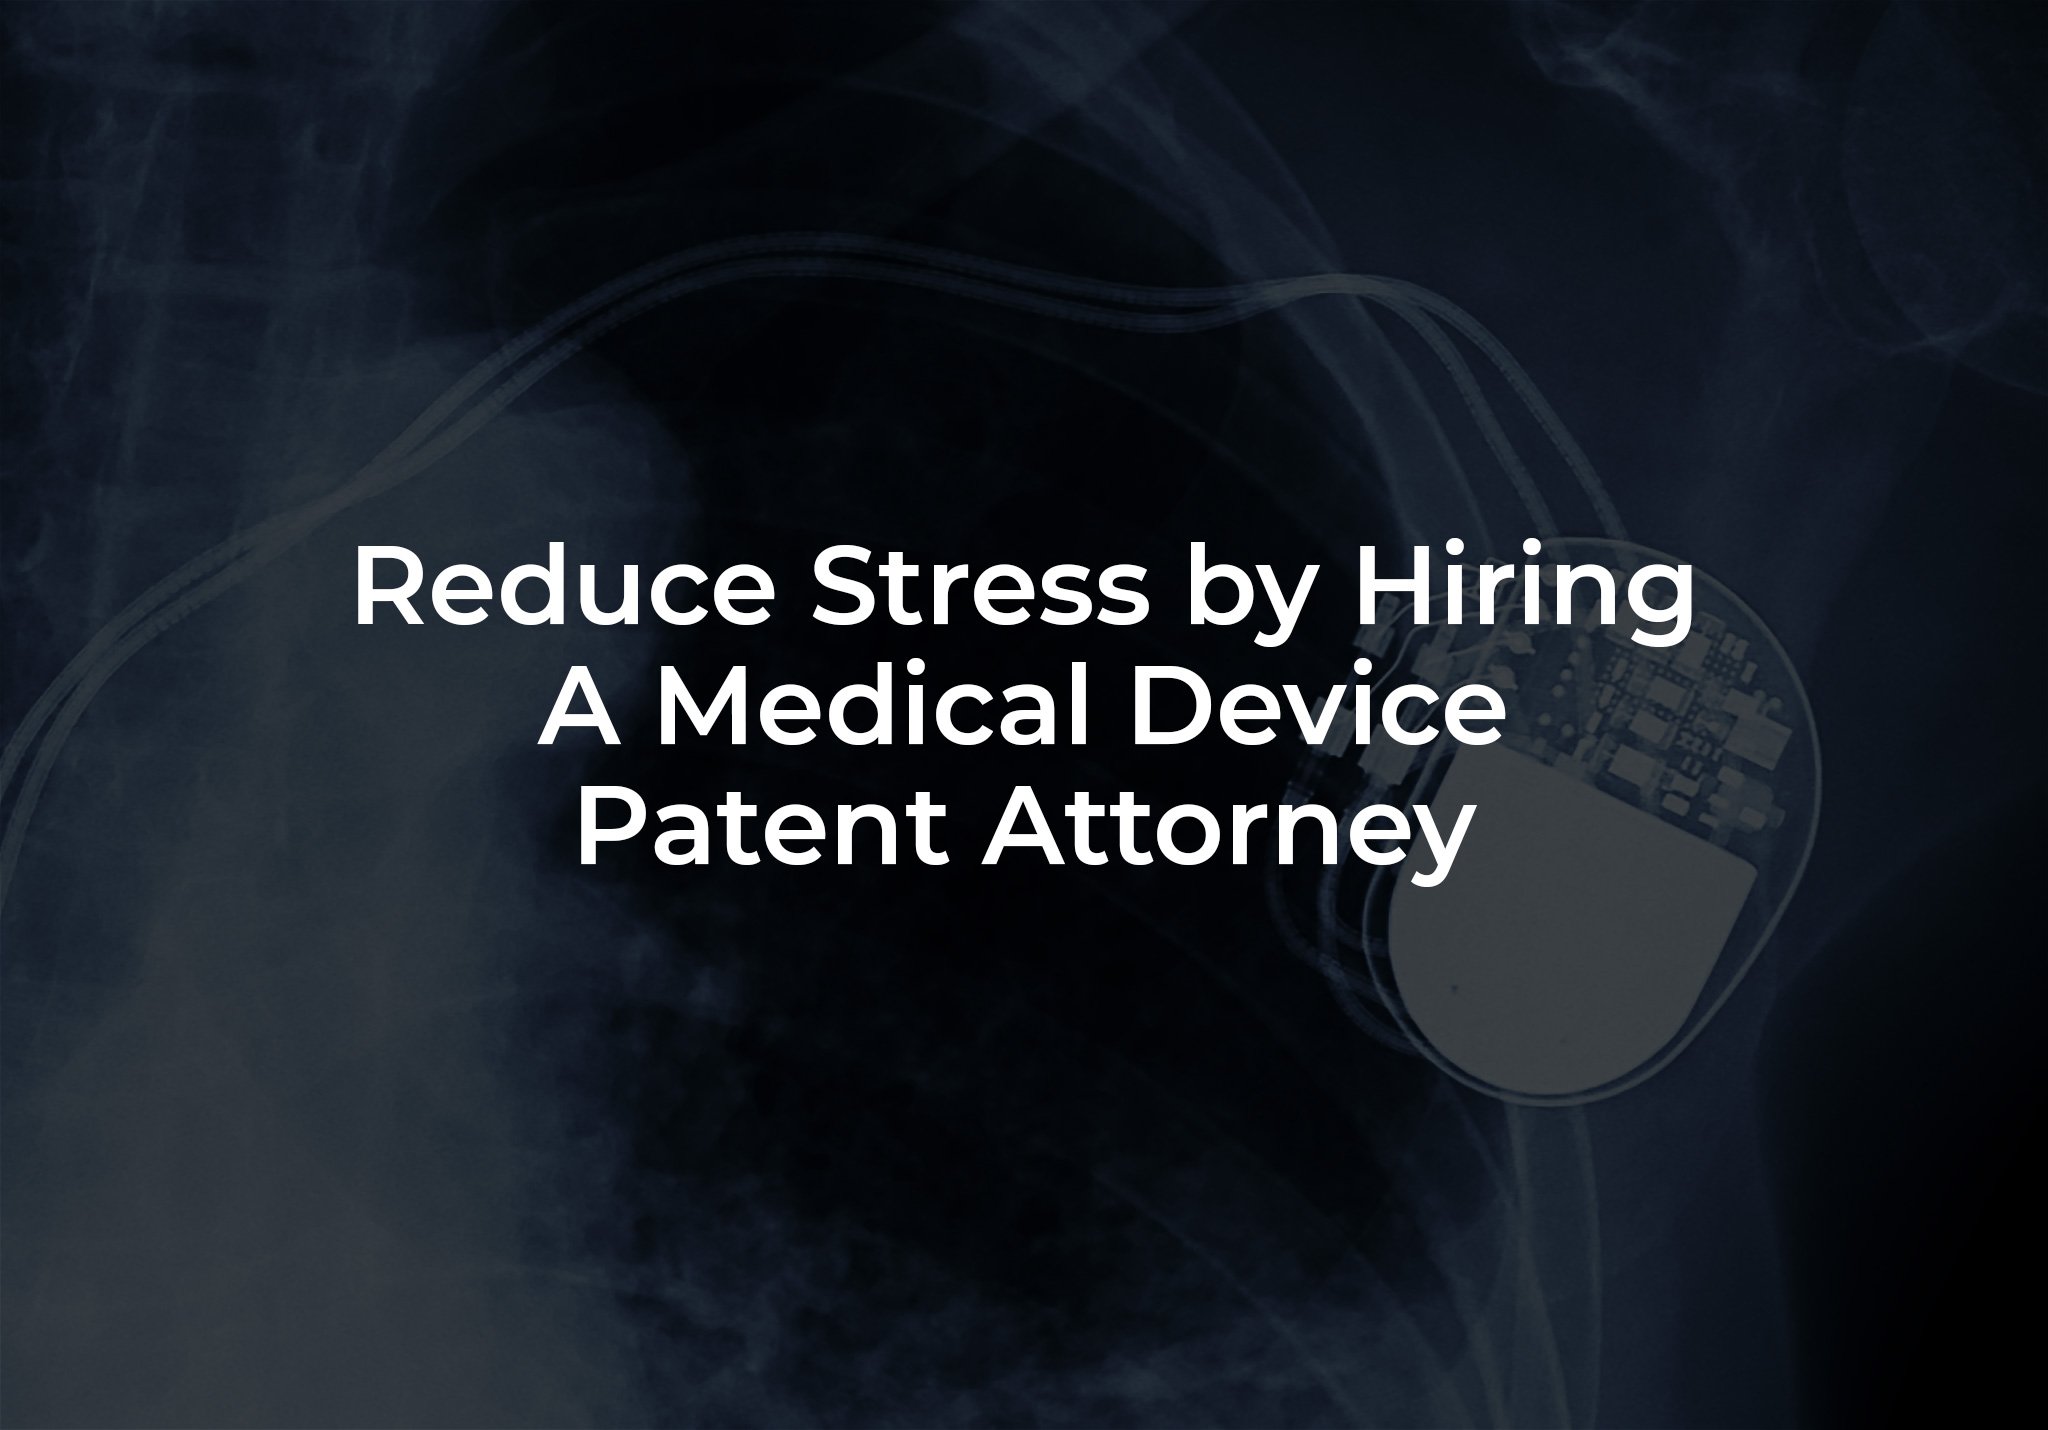 Reduce Stress by Hiring a Medical Device Patent Attorney